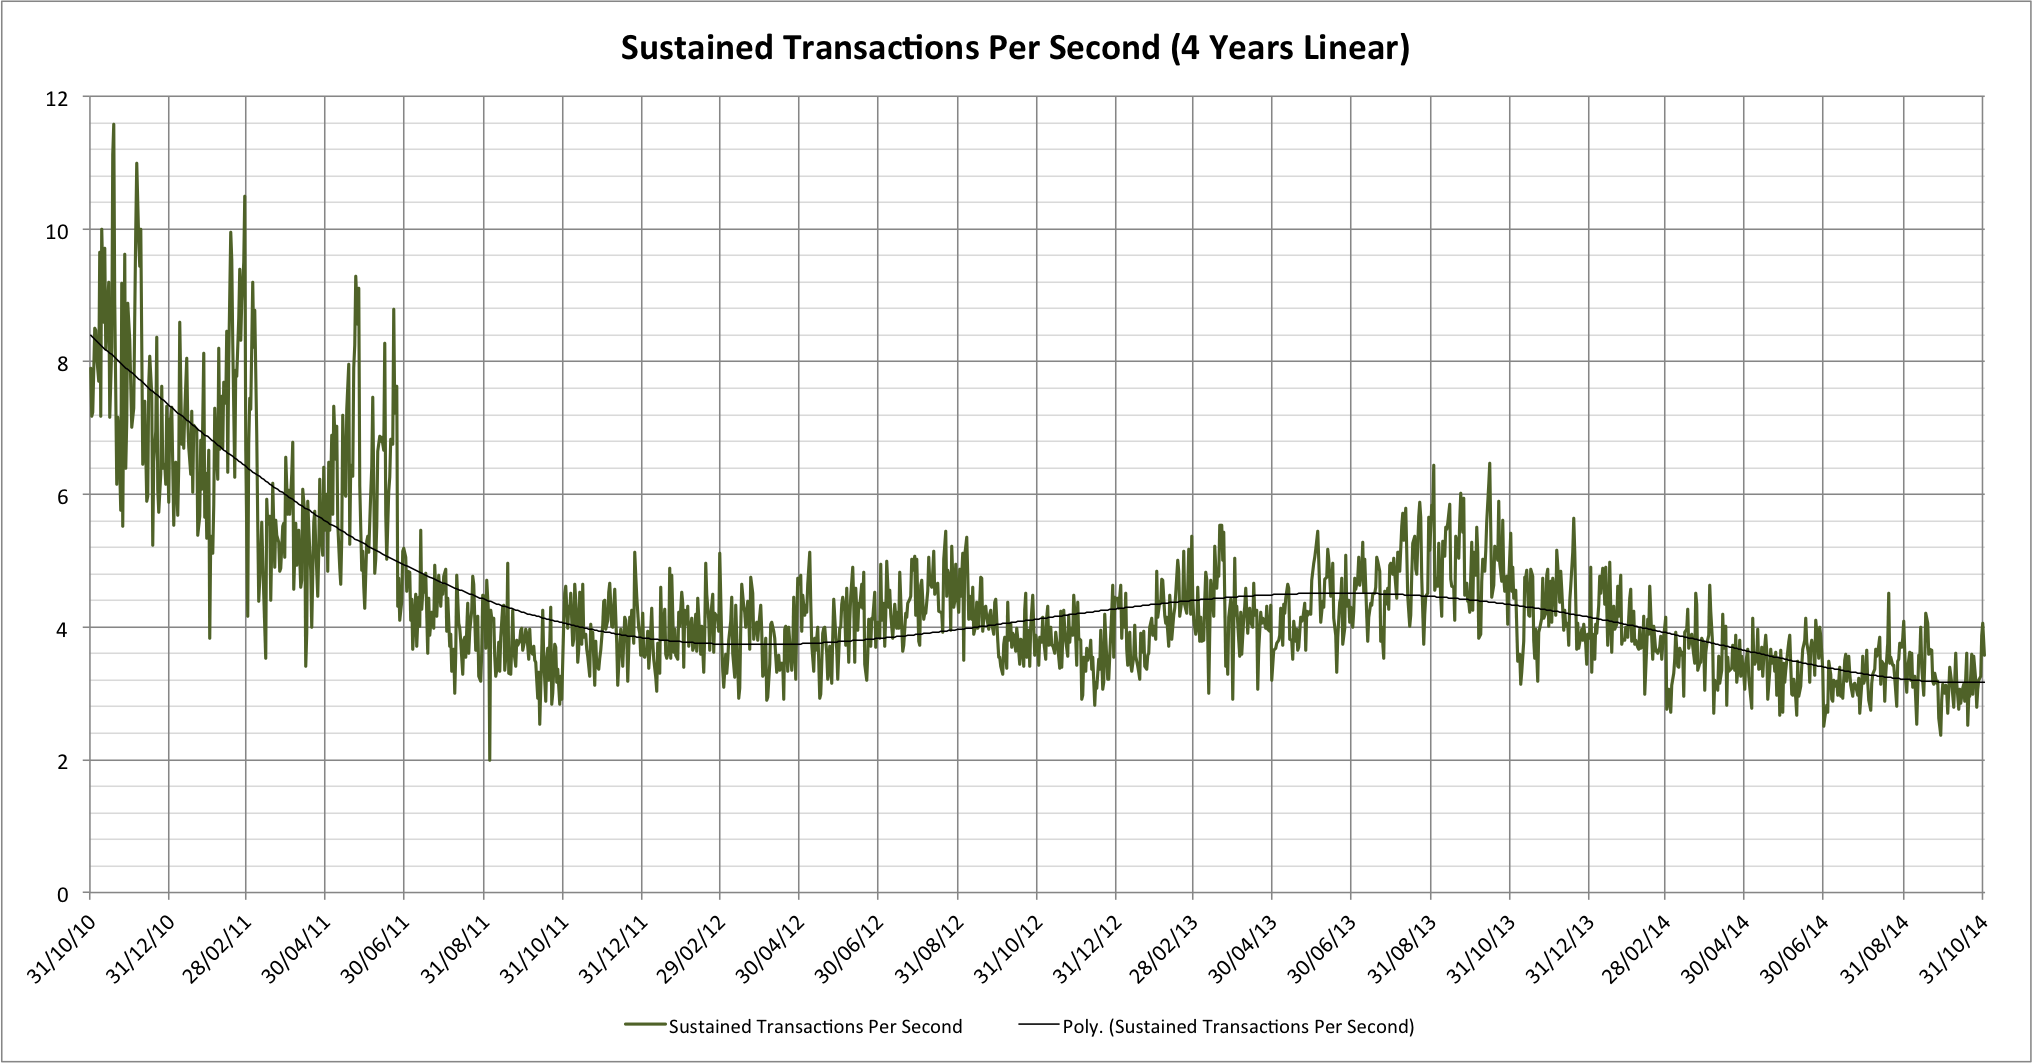 Sustainable transactions per second rate (linear chart)